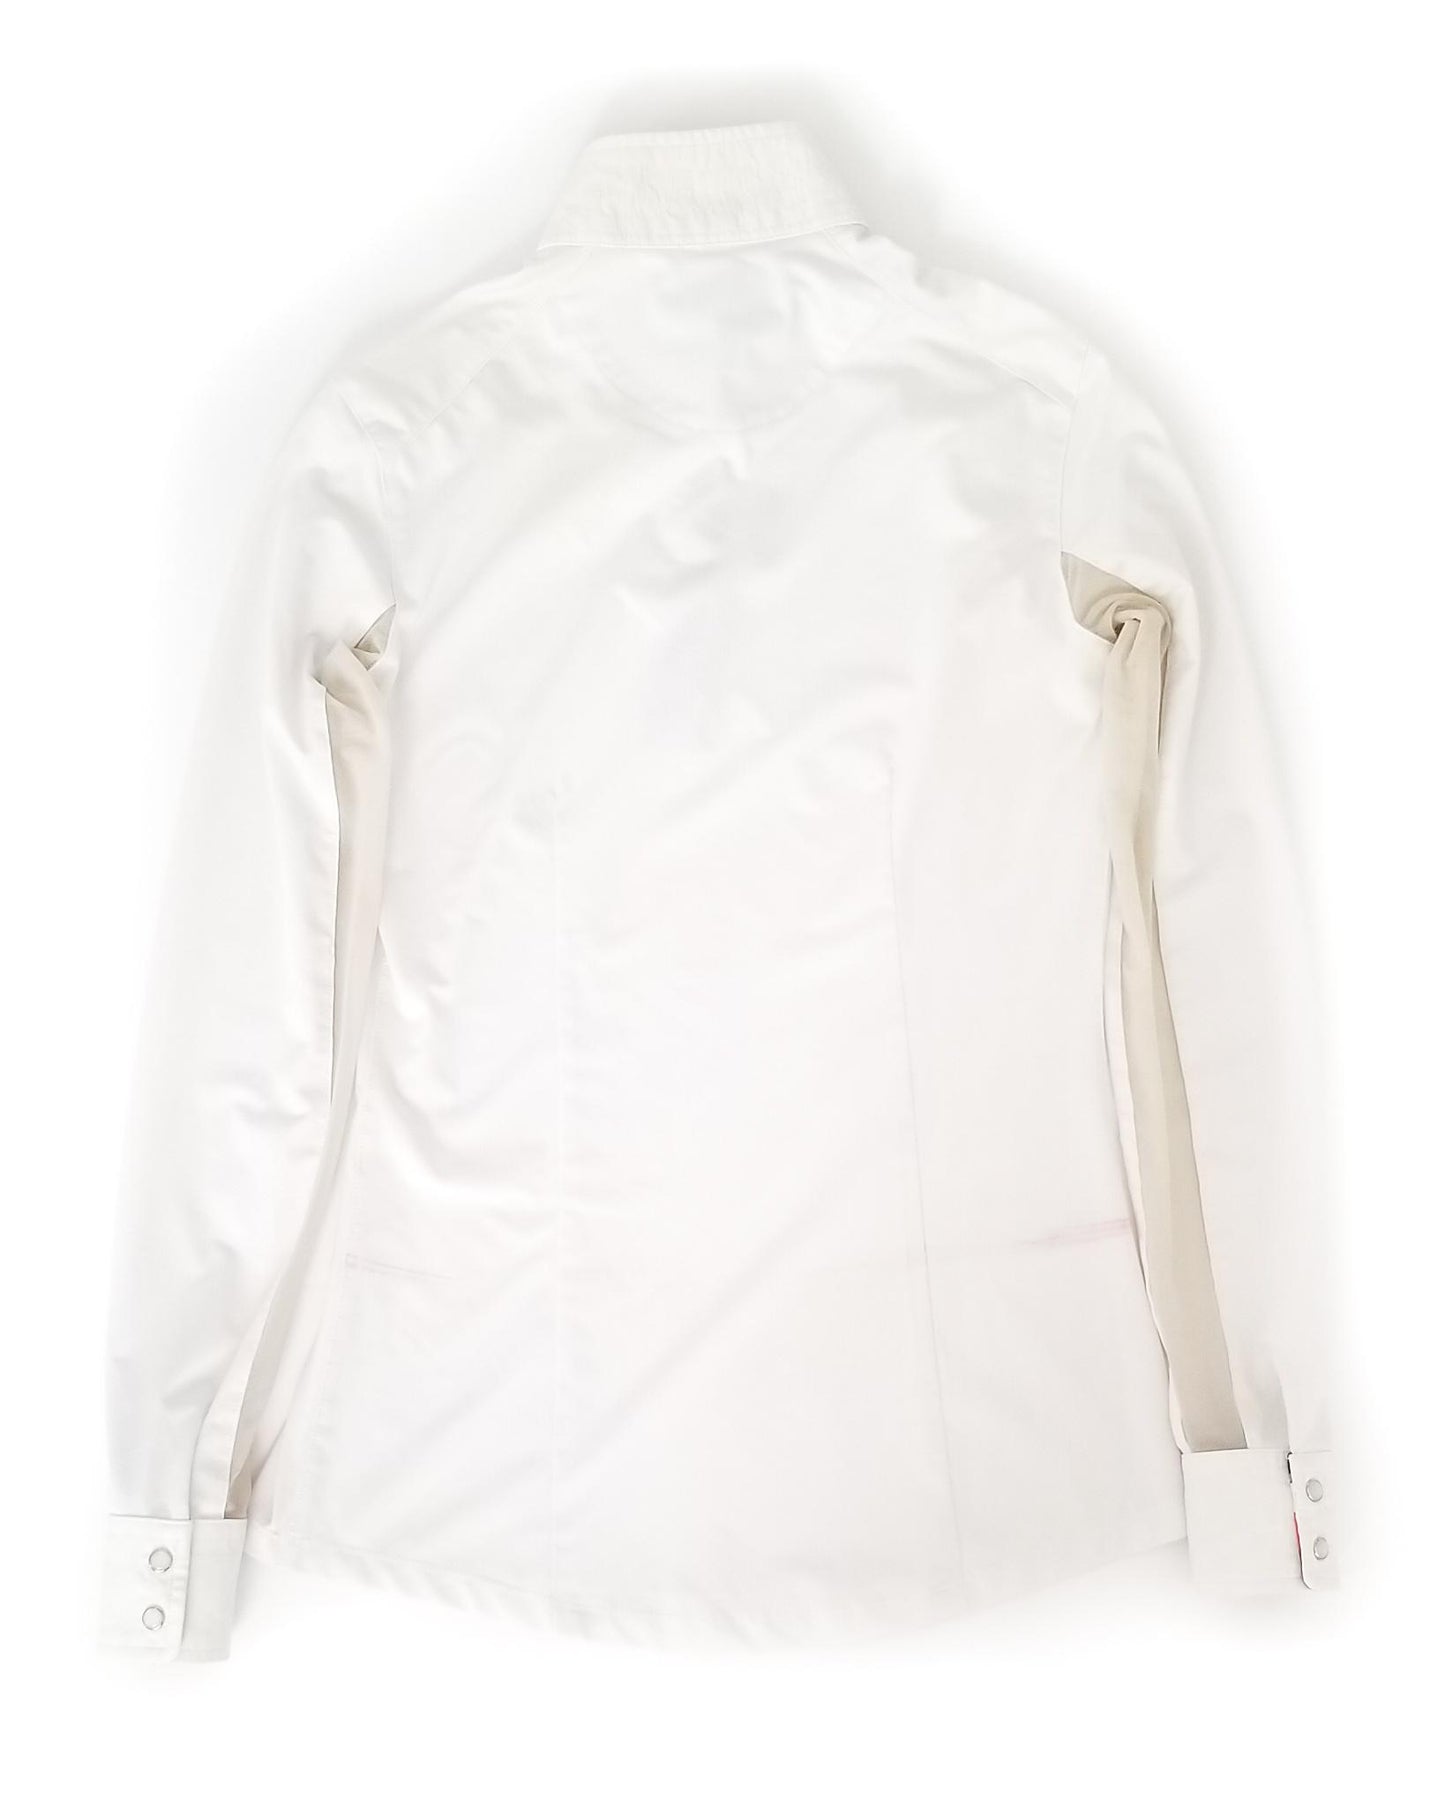 The Tailored Sportsman IceFil Show Shirt - White - Women's Small